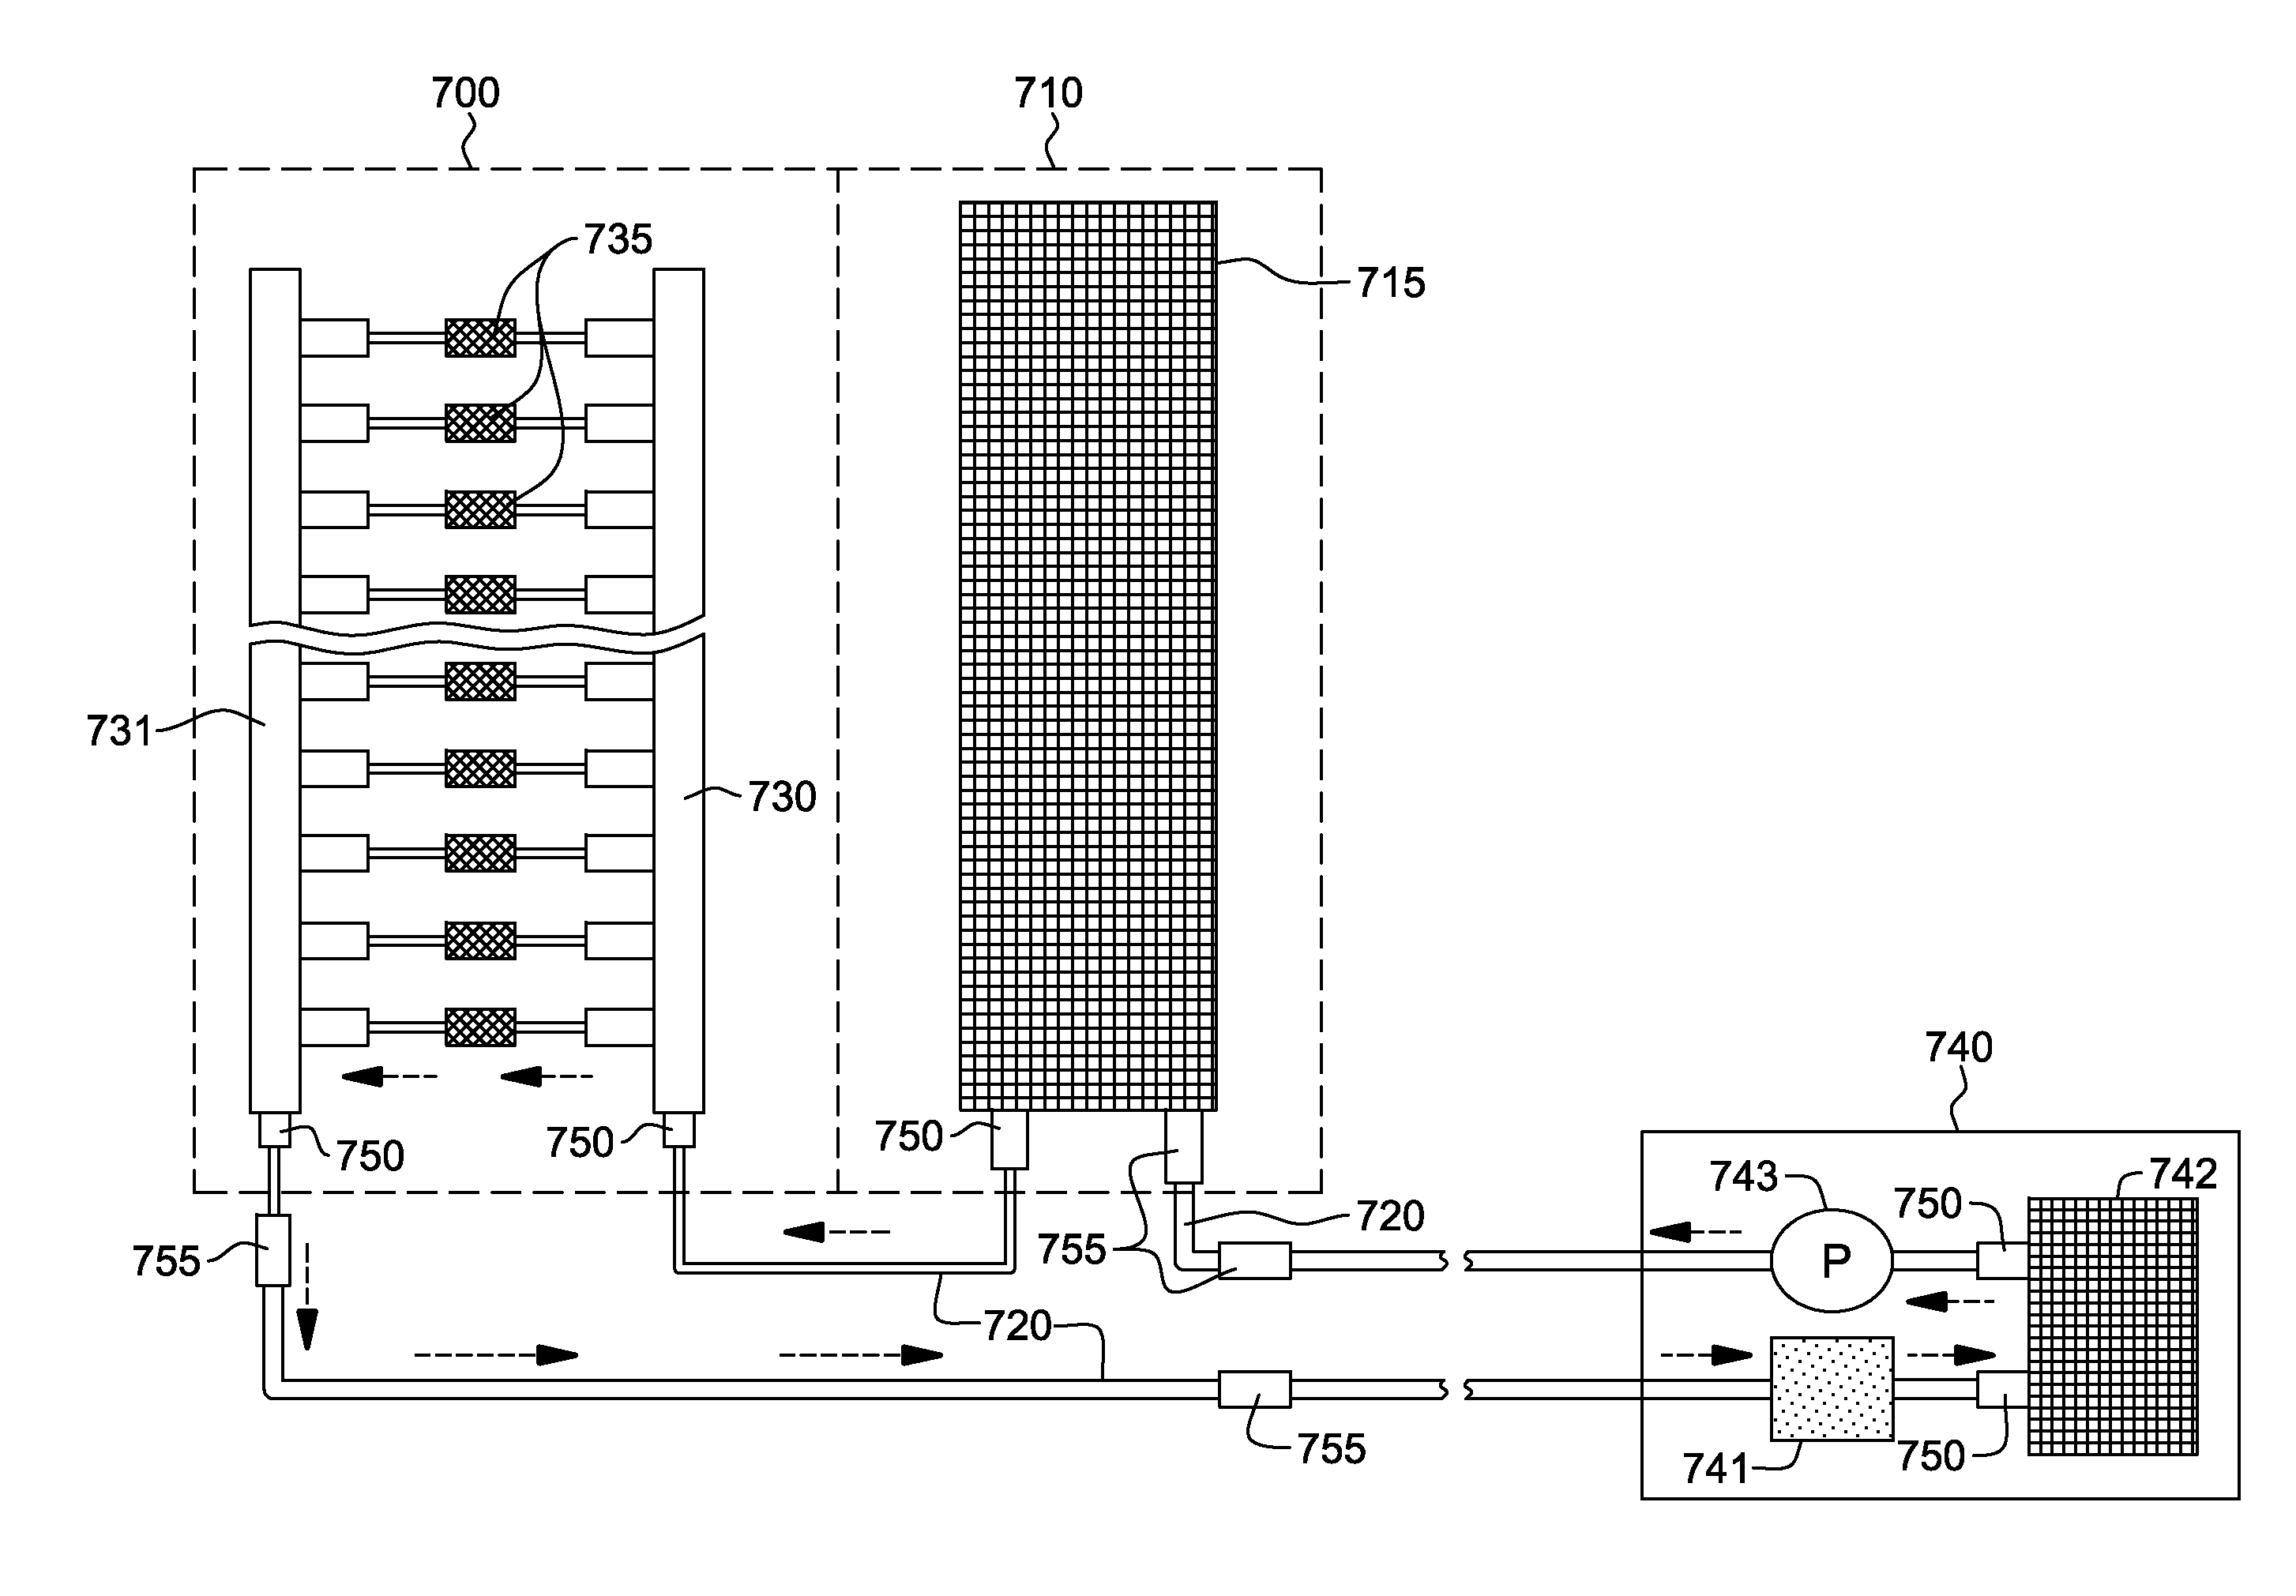 Modular pumping unit(s) facilitating cooling of electronic system(s)